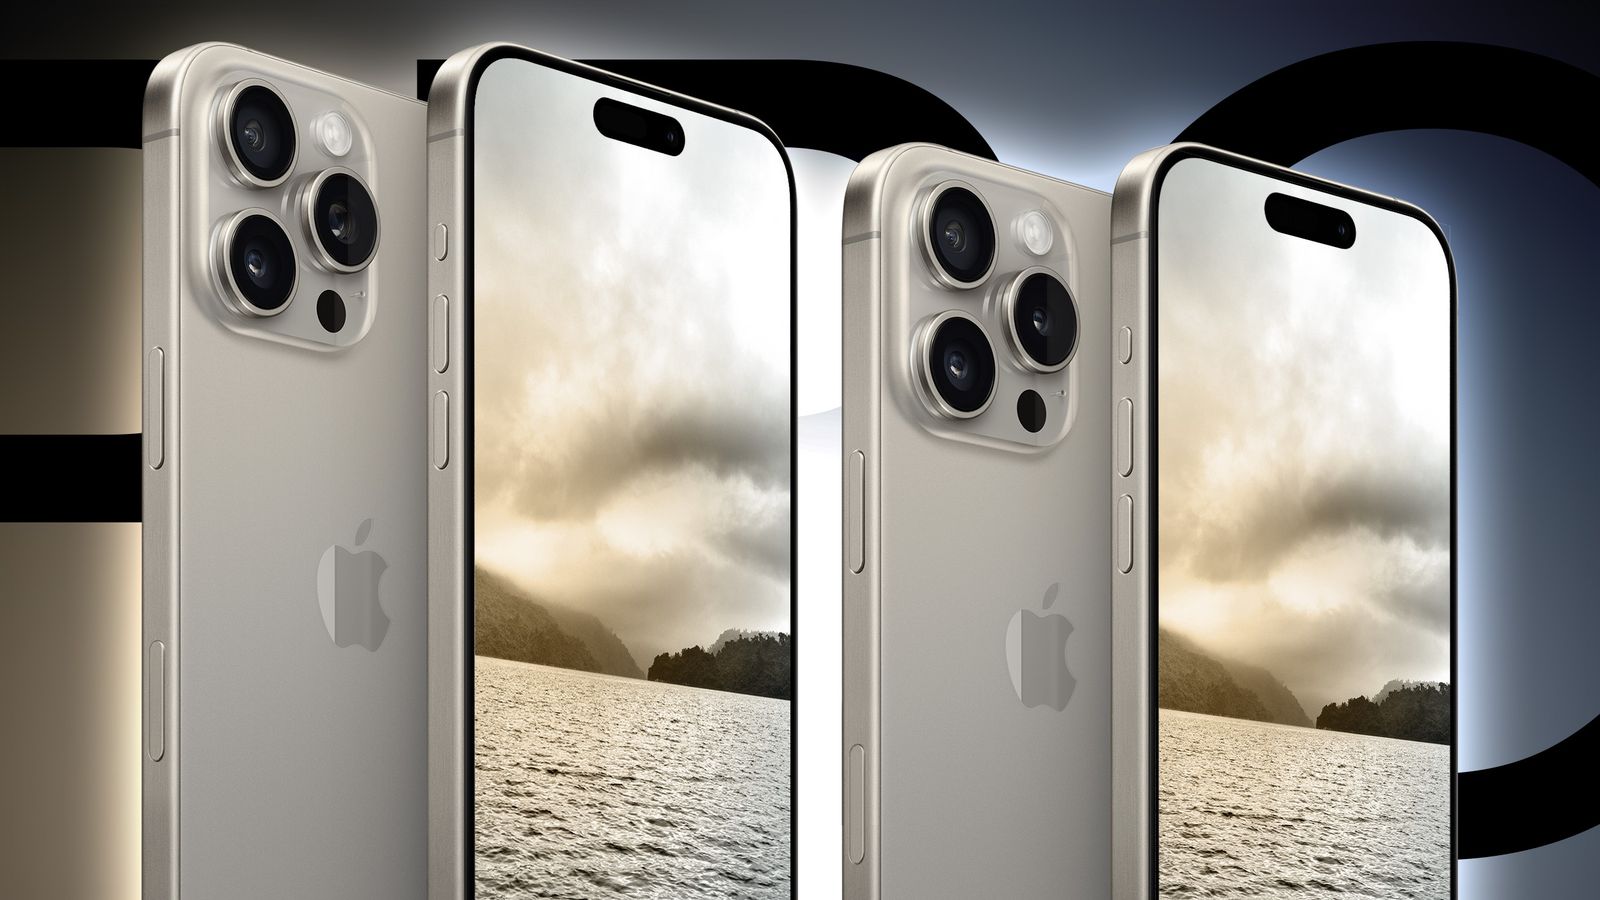 Breaking News Apple's iPhone 16 Set to Launch - Latest Features, Release Date, and More Exciting Details Revealed